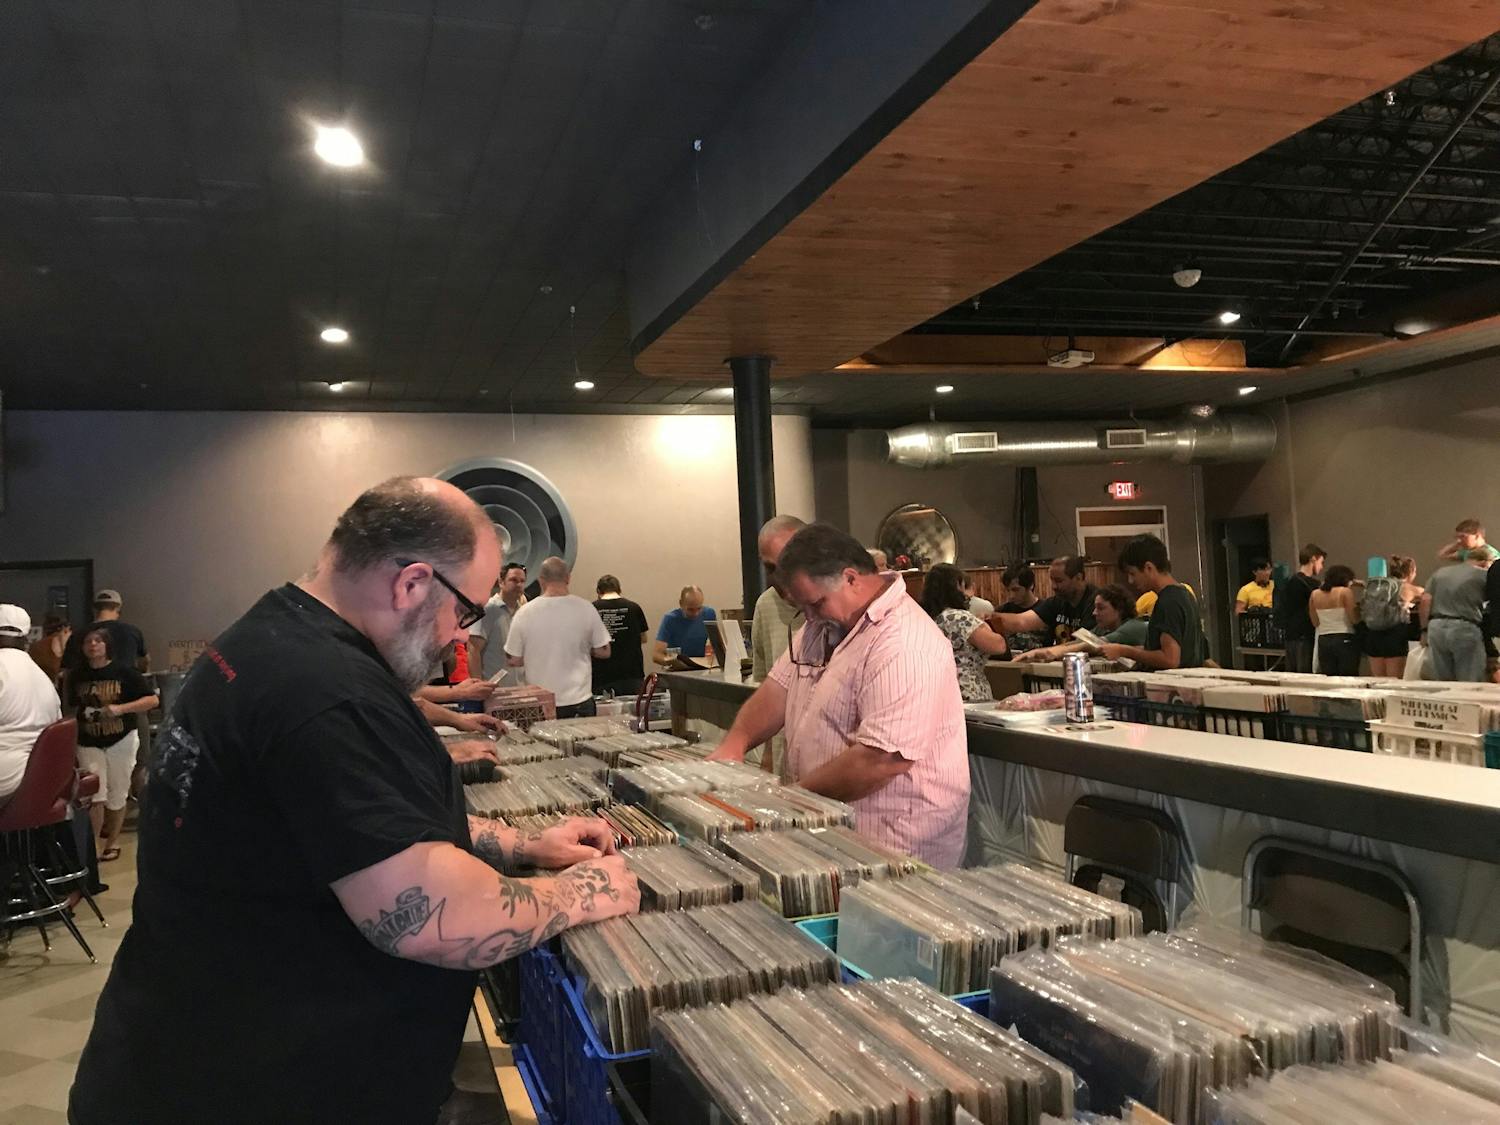 Music lovers of all ages gathered at The Wooly to sift through countless records for vinyl treasures.